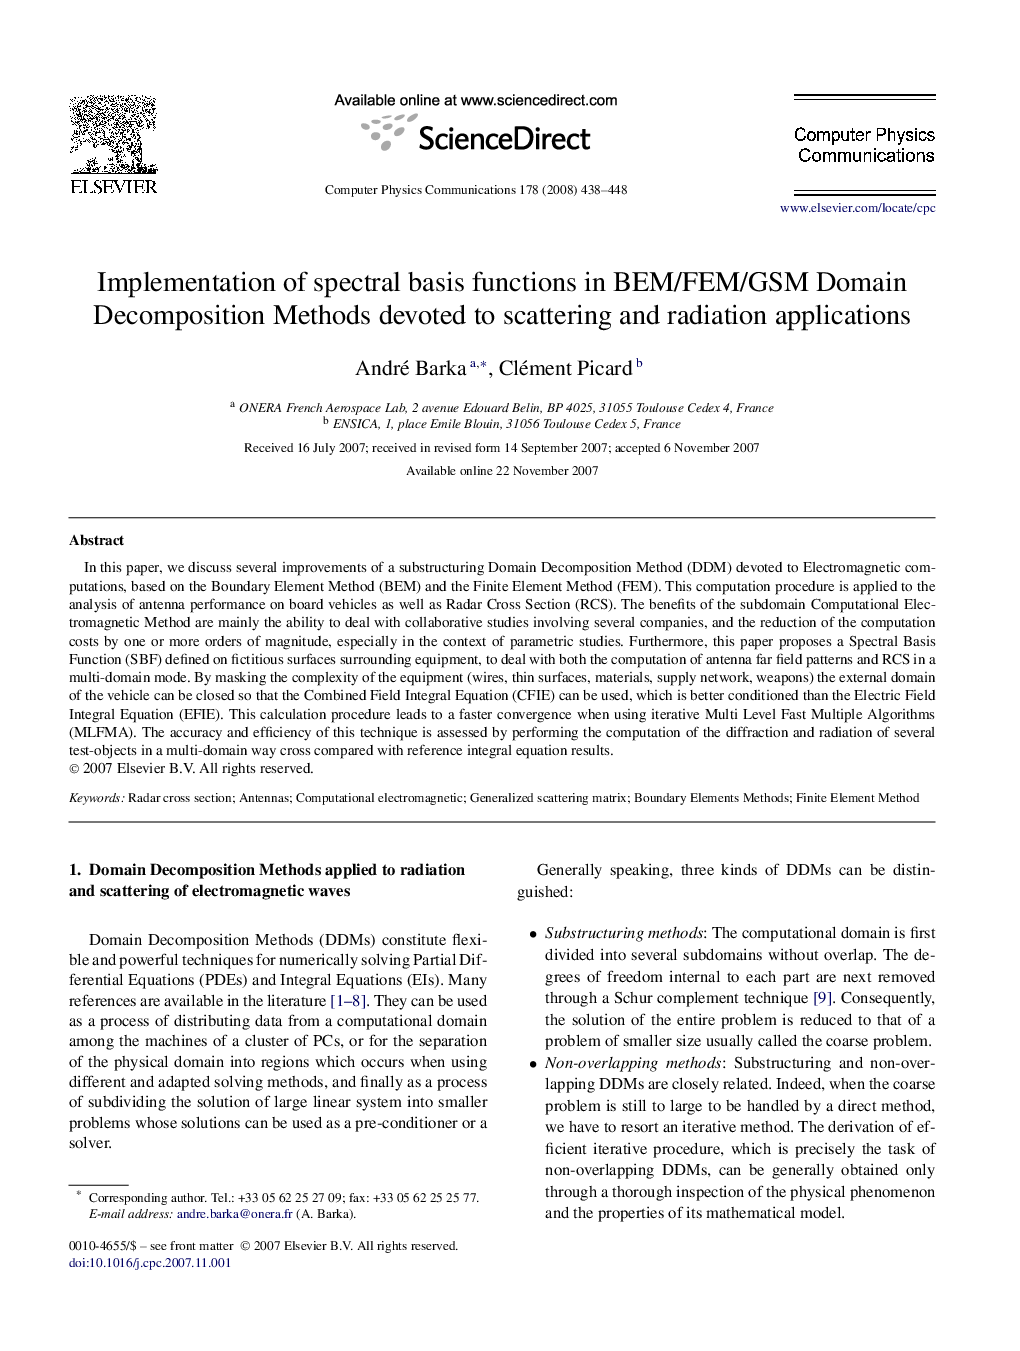 Implementation of spectral basis functions in BEM/FEM/GSM Domain Decomposition Methods devoted to scattering and radiation applications